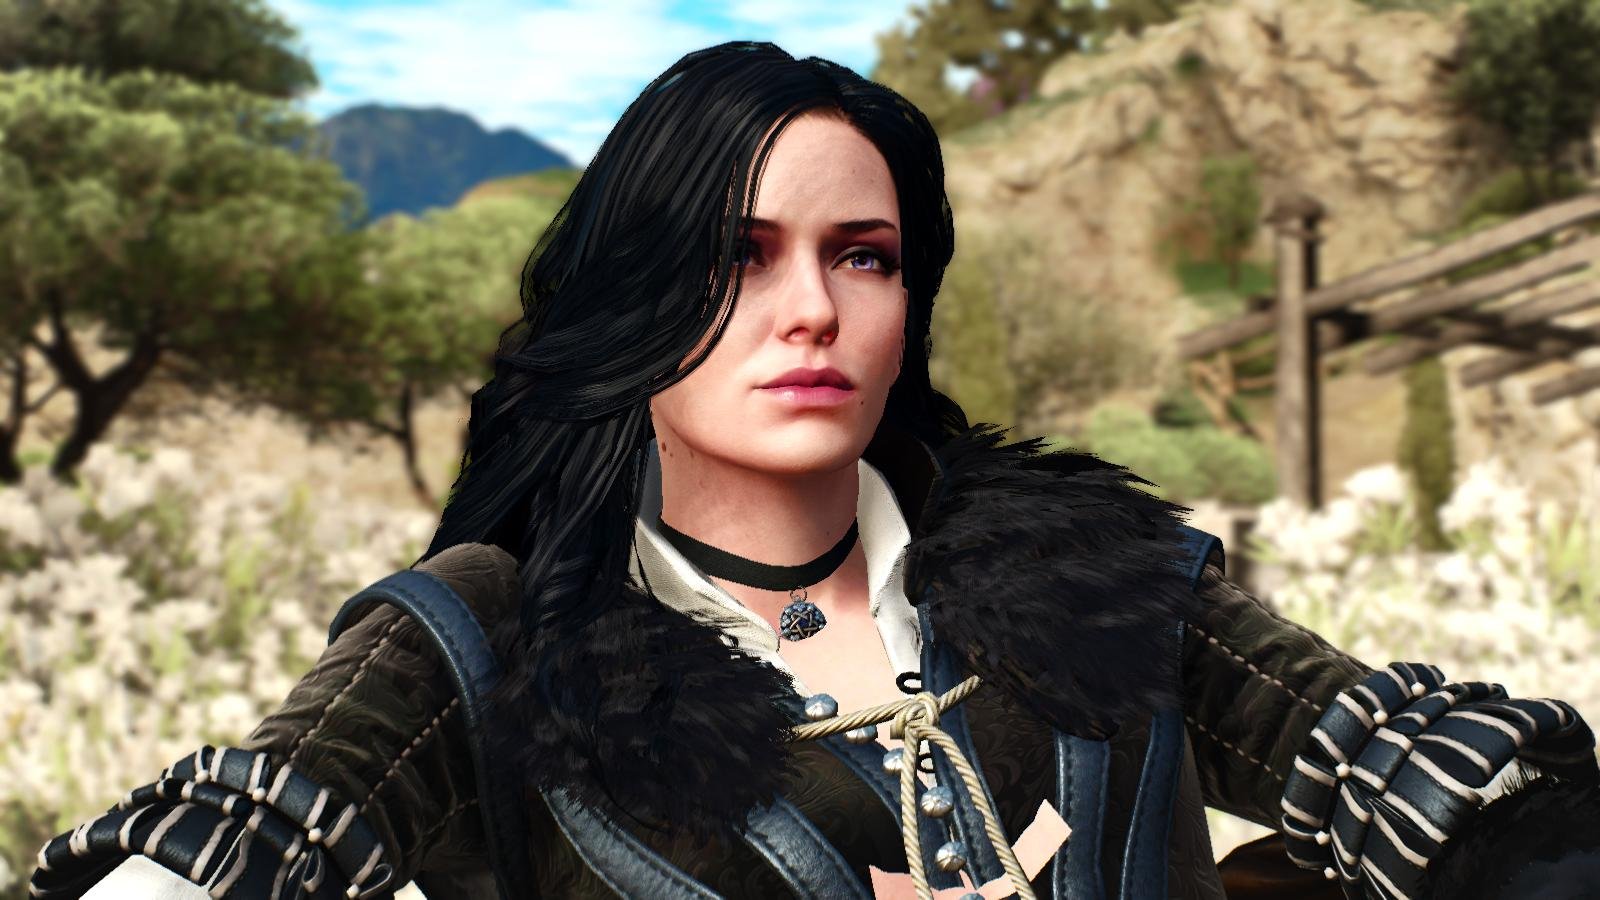 Yennefer of vengerberg the witcher 3 voiced standalone follower фото 71